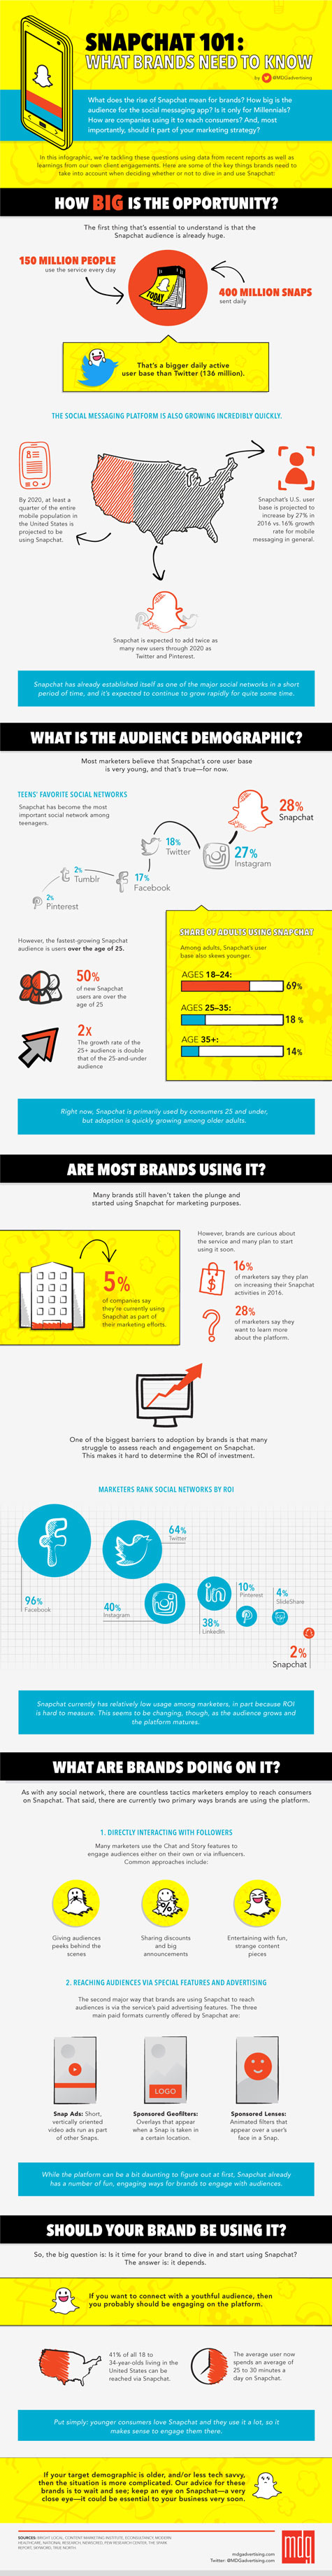 Original post: http://www.socialmediatoday.com/social-business/snapchat-101-what-brands-need-know-infographic